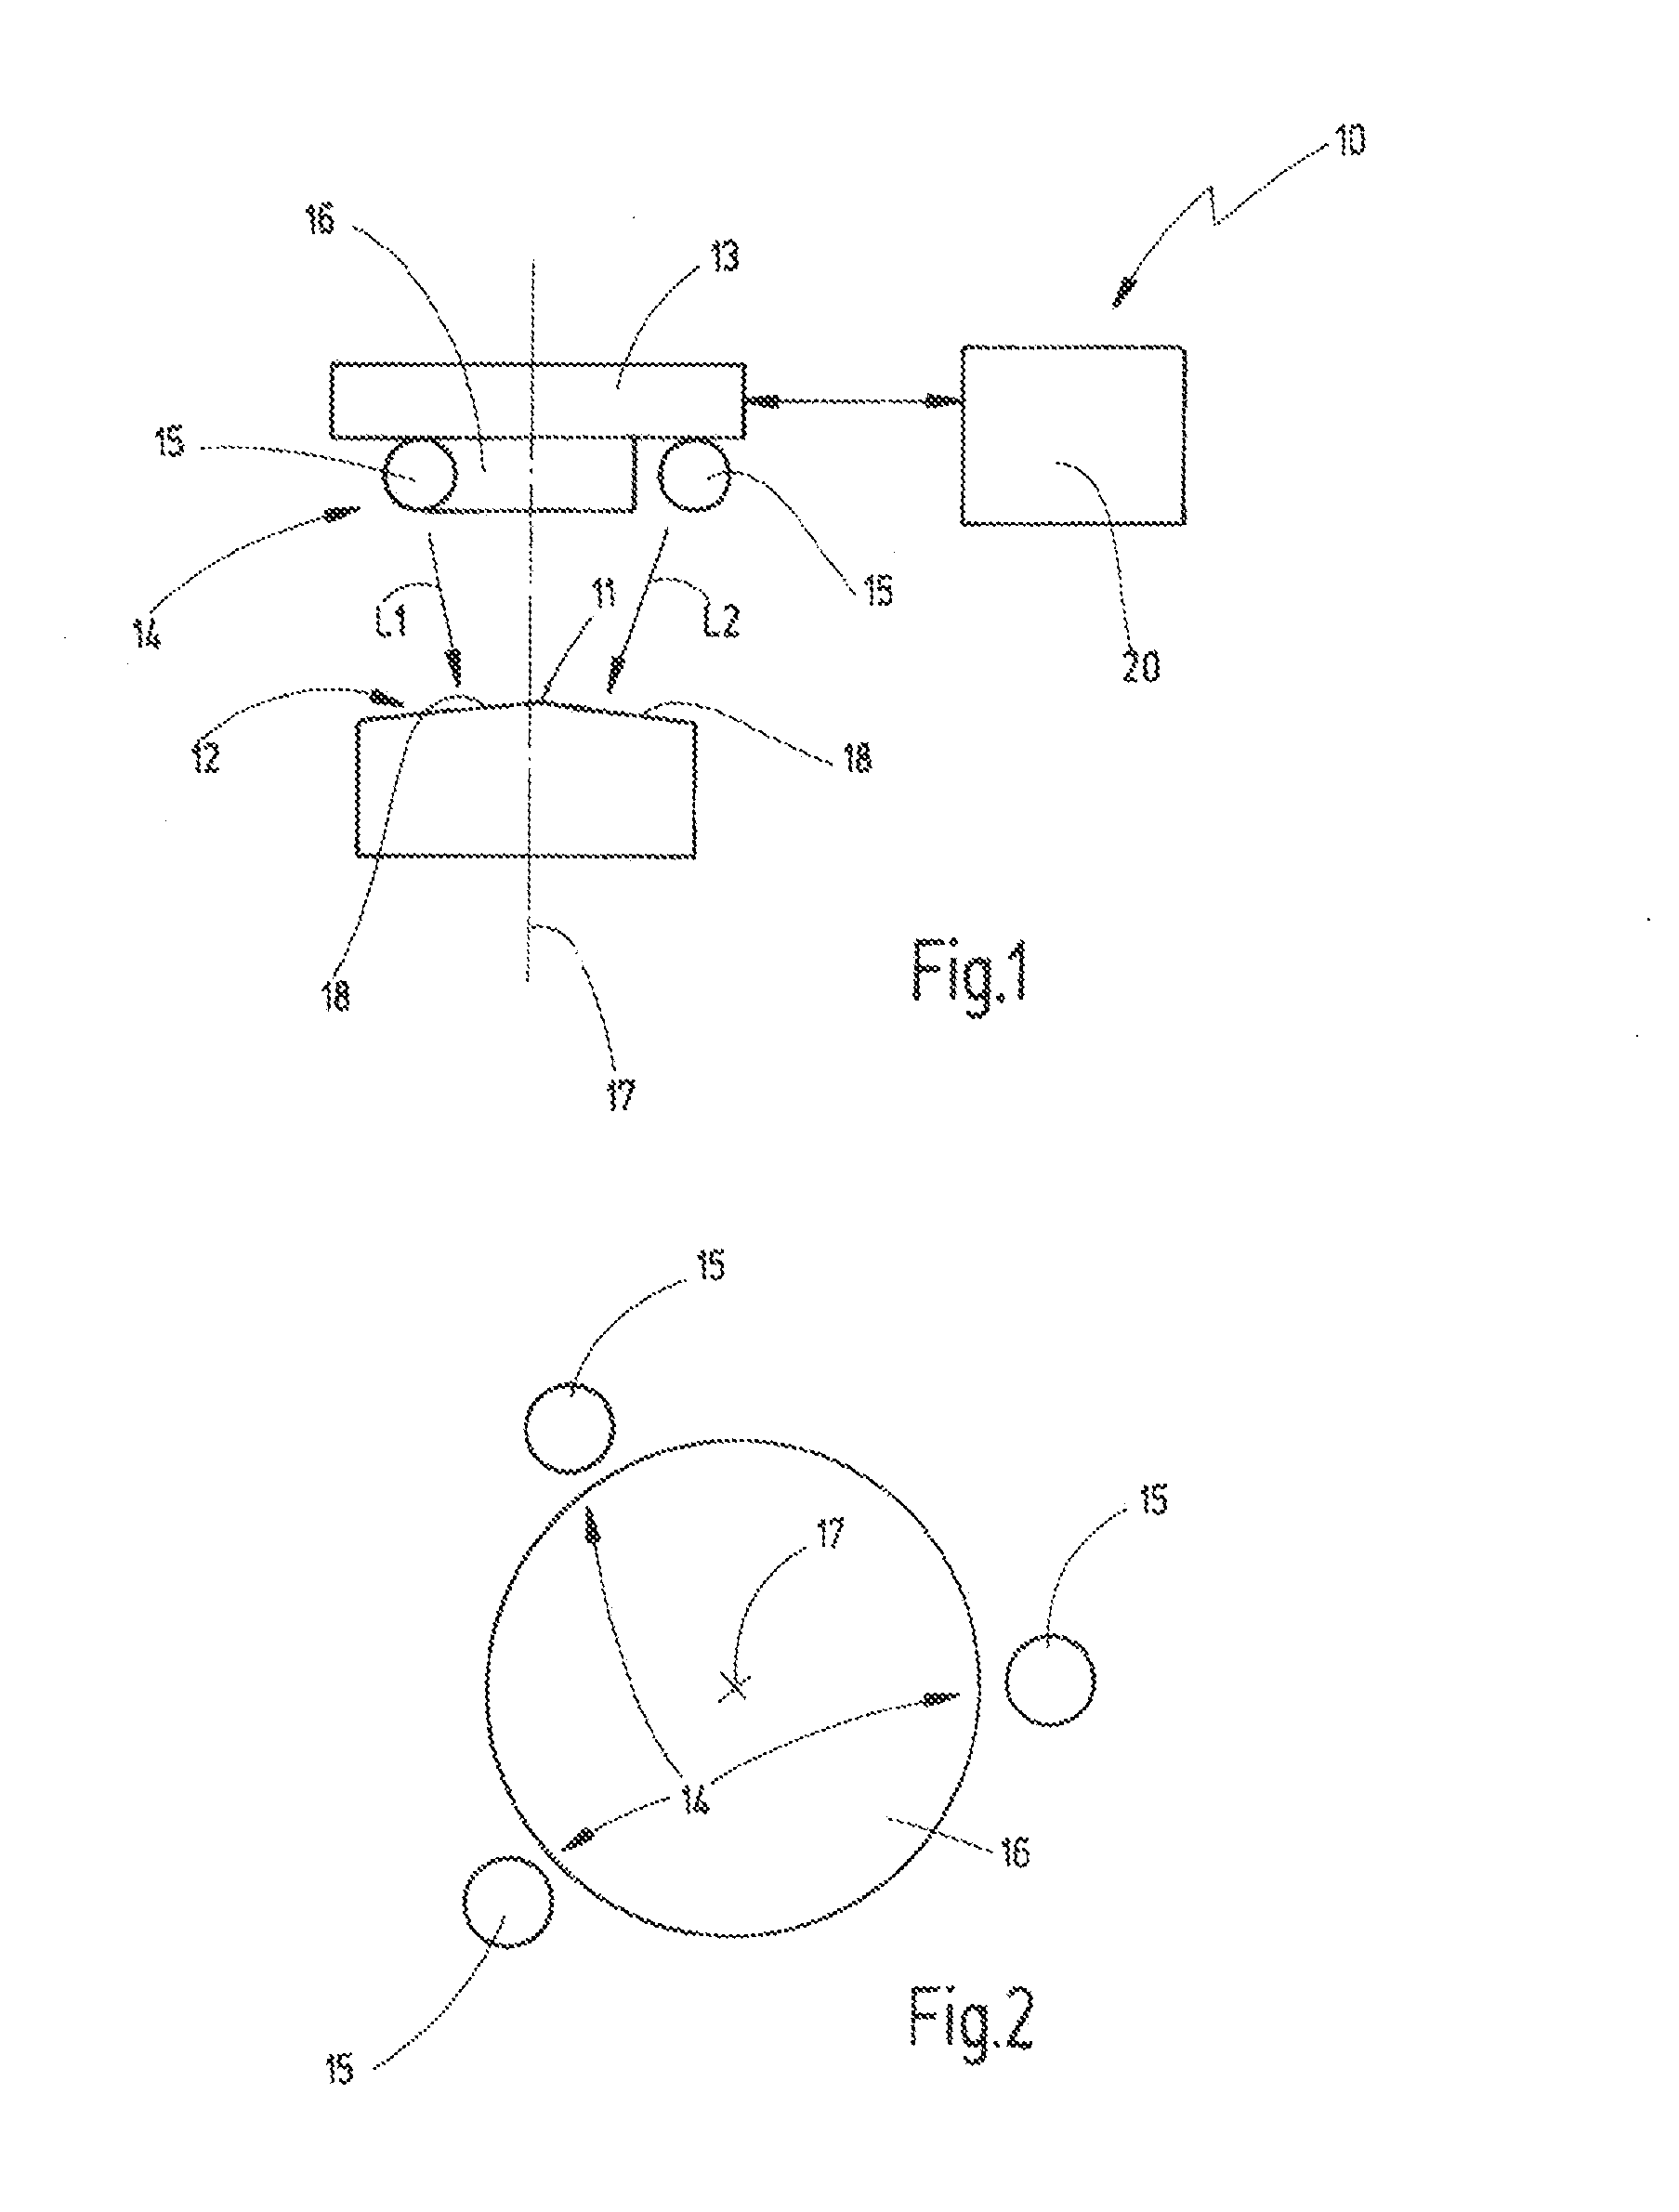 Method for optically scanning an edge in or on a surface region